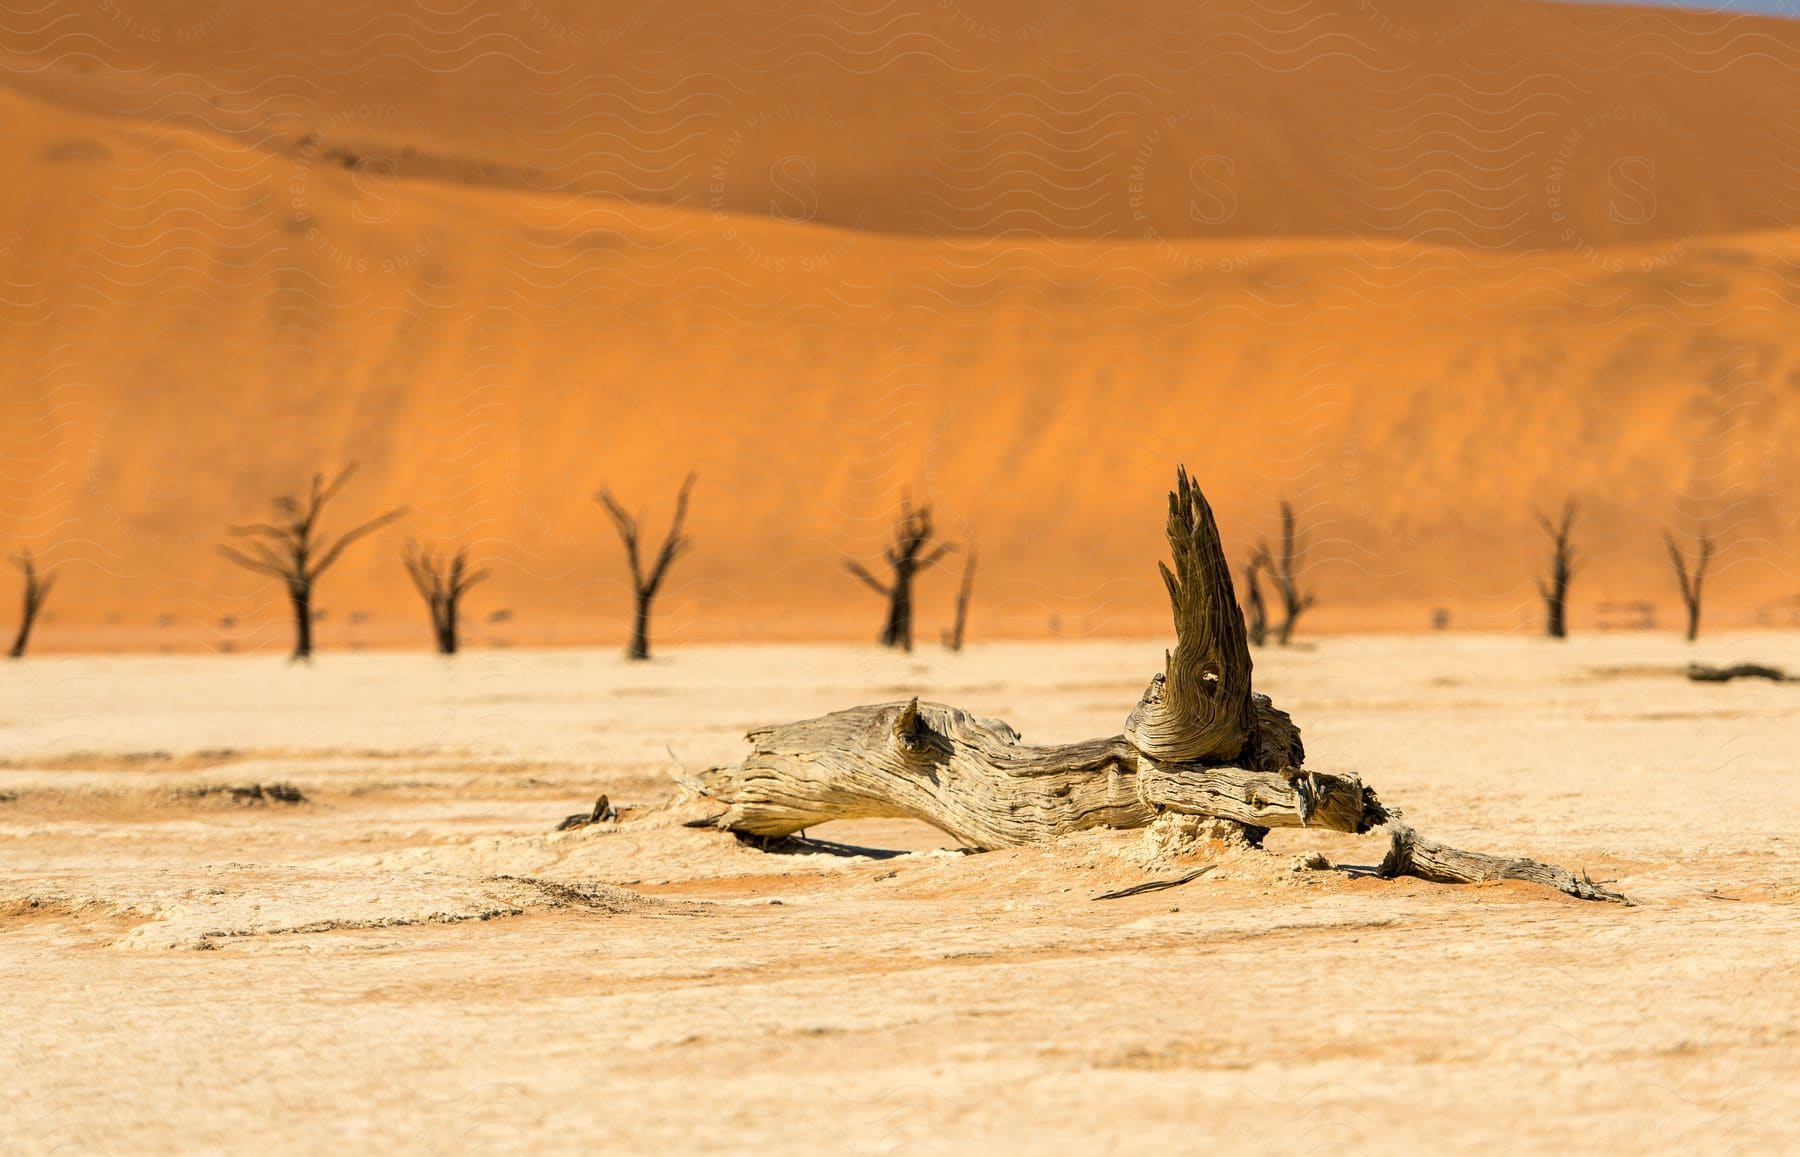 A desert landscape with cracked soil, a dead tree trunk in the foreground and several leafless trees in the background, against large dunes.